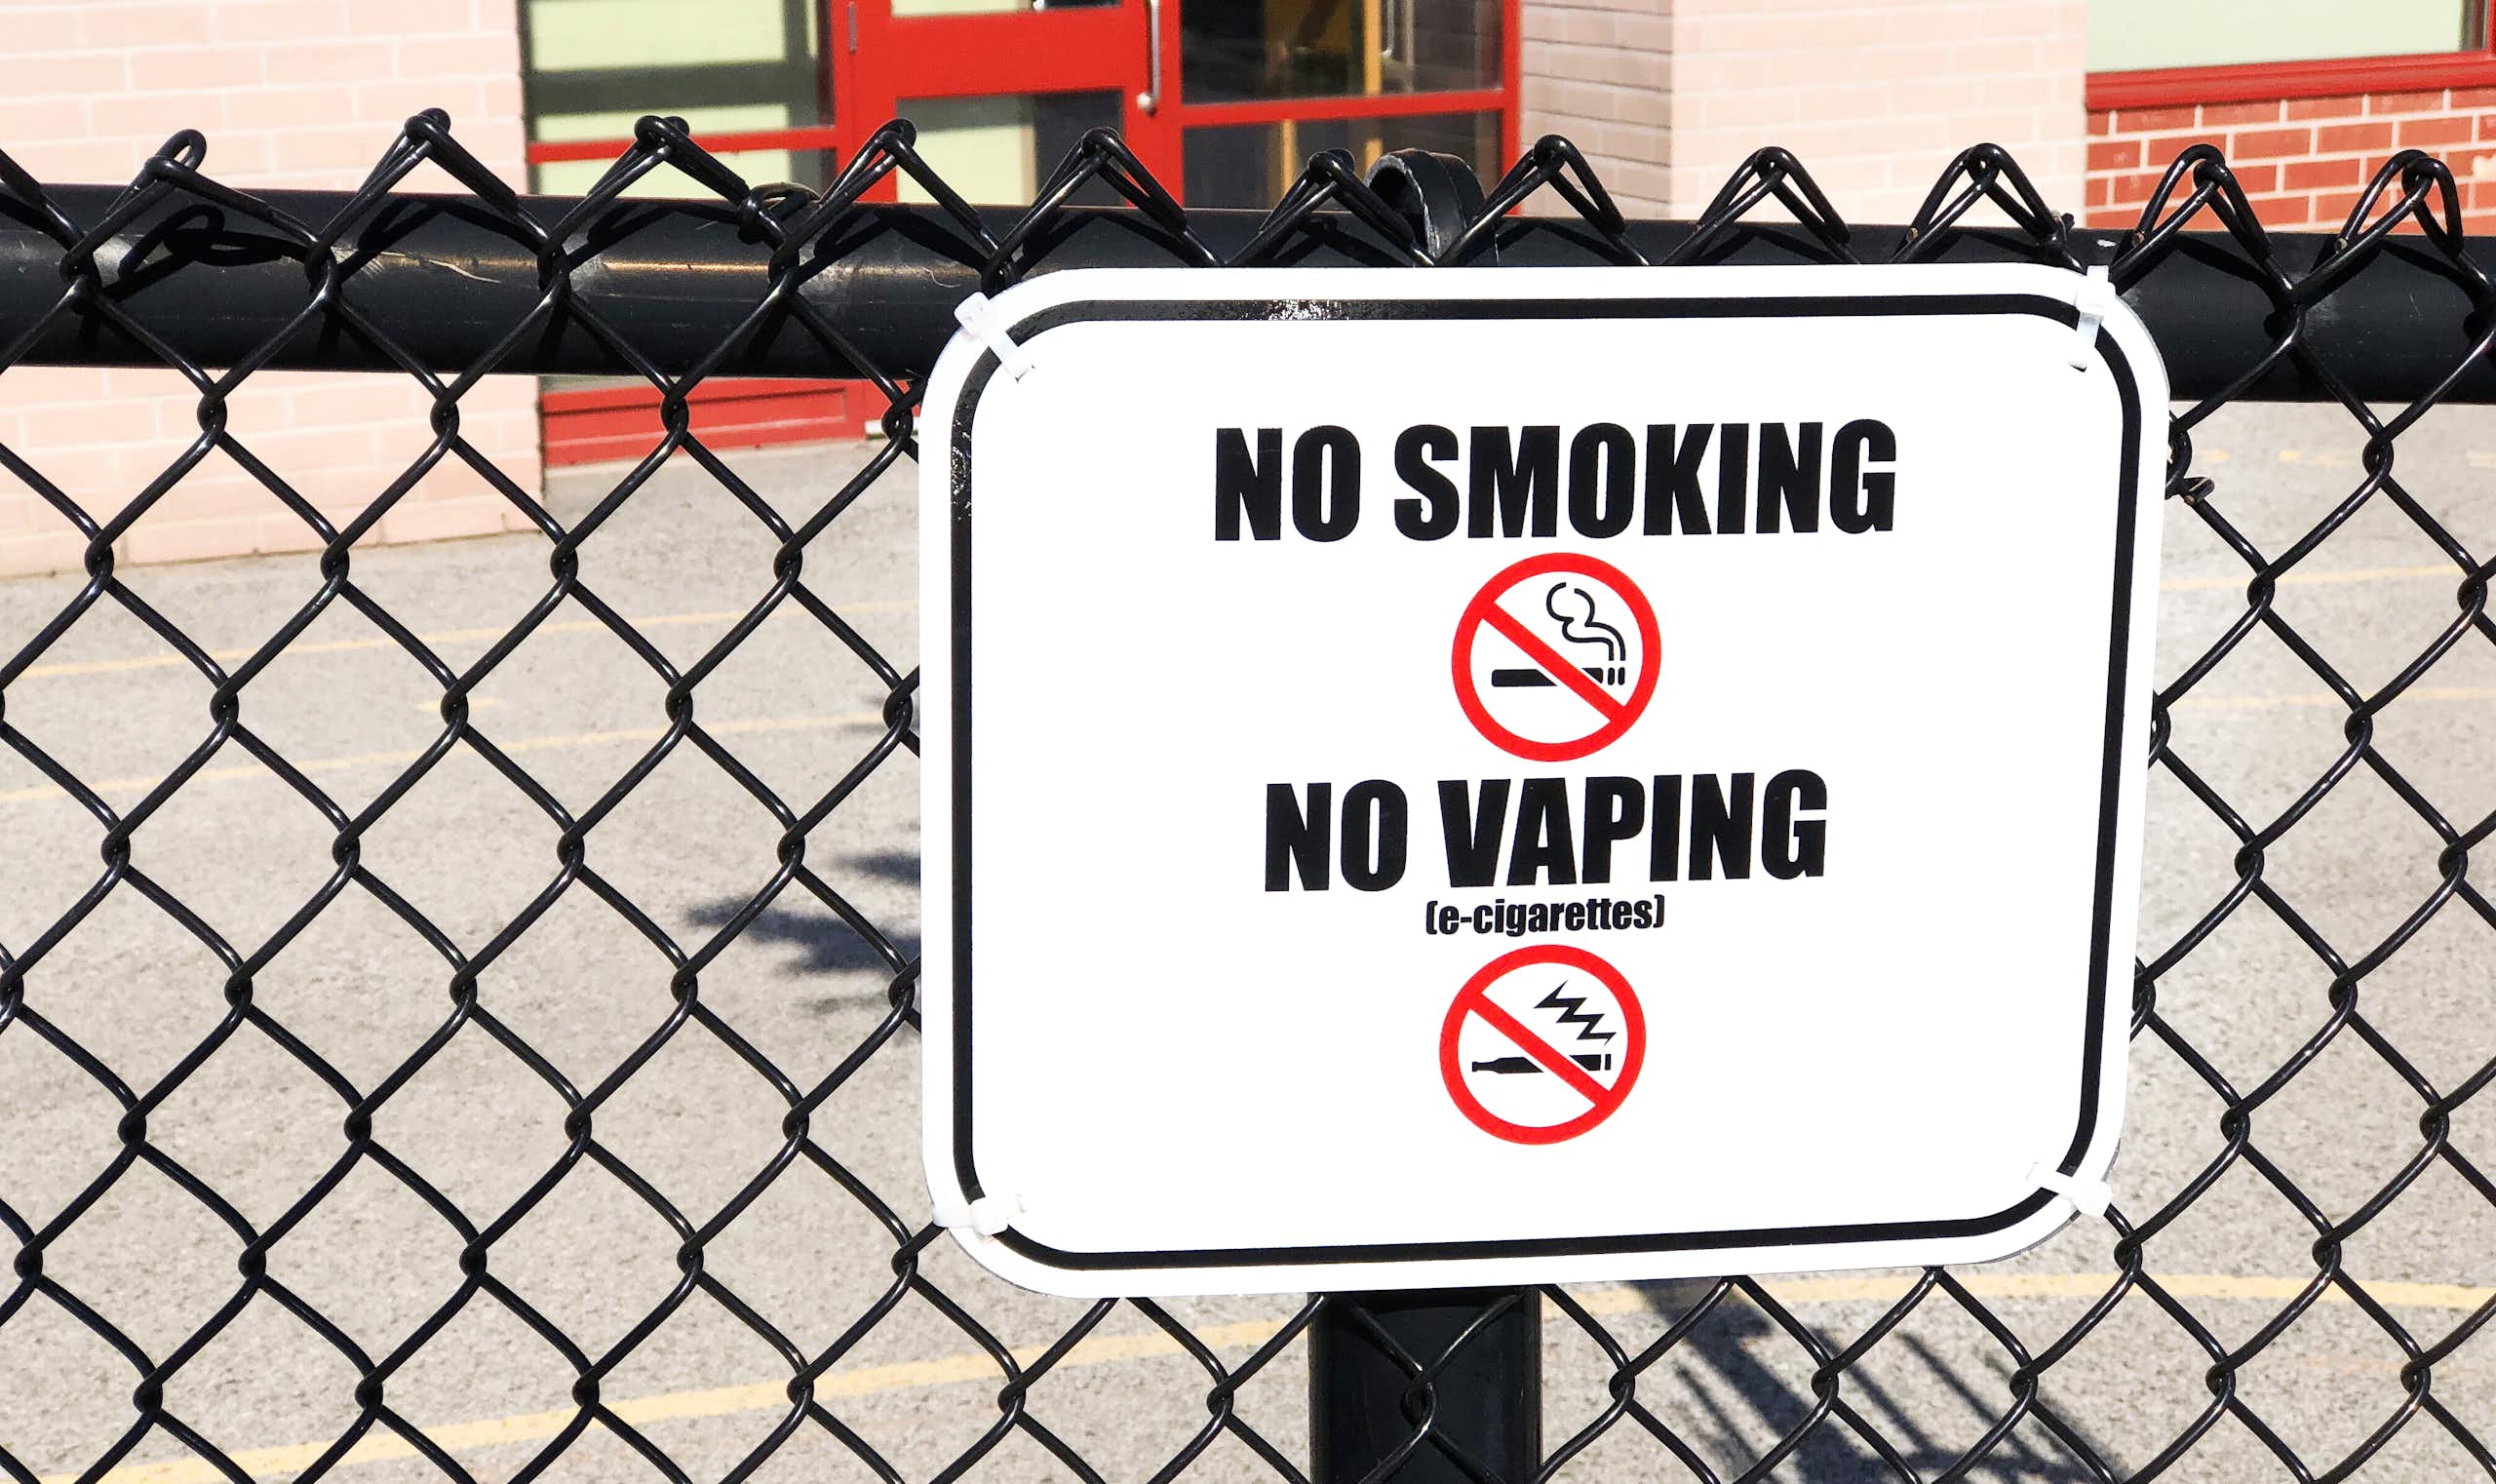 A no smoking, no vaping sign seen on a fence.